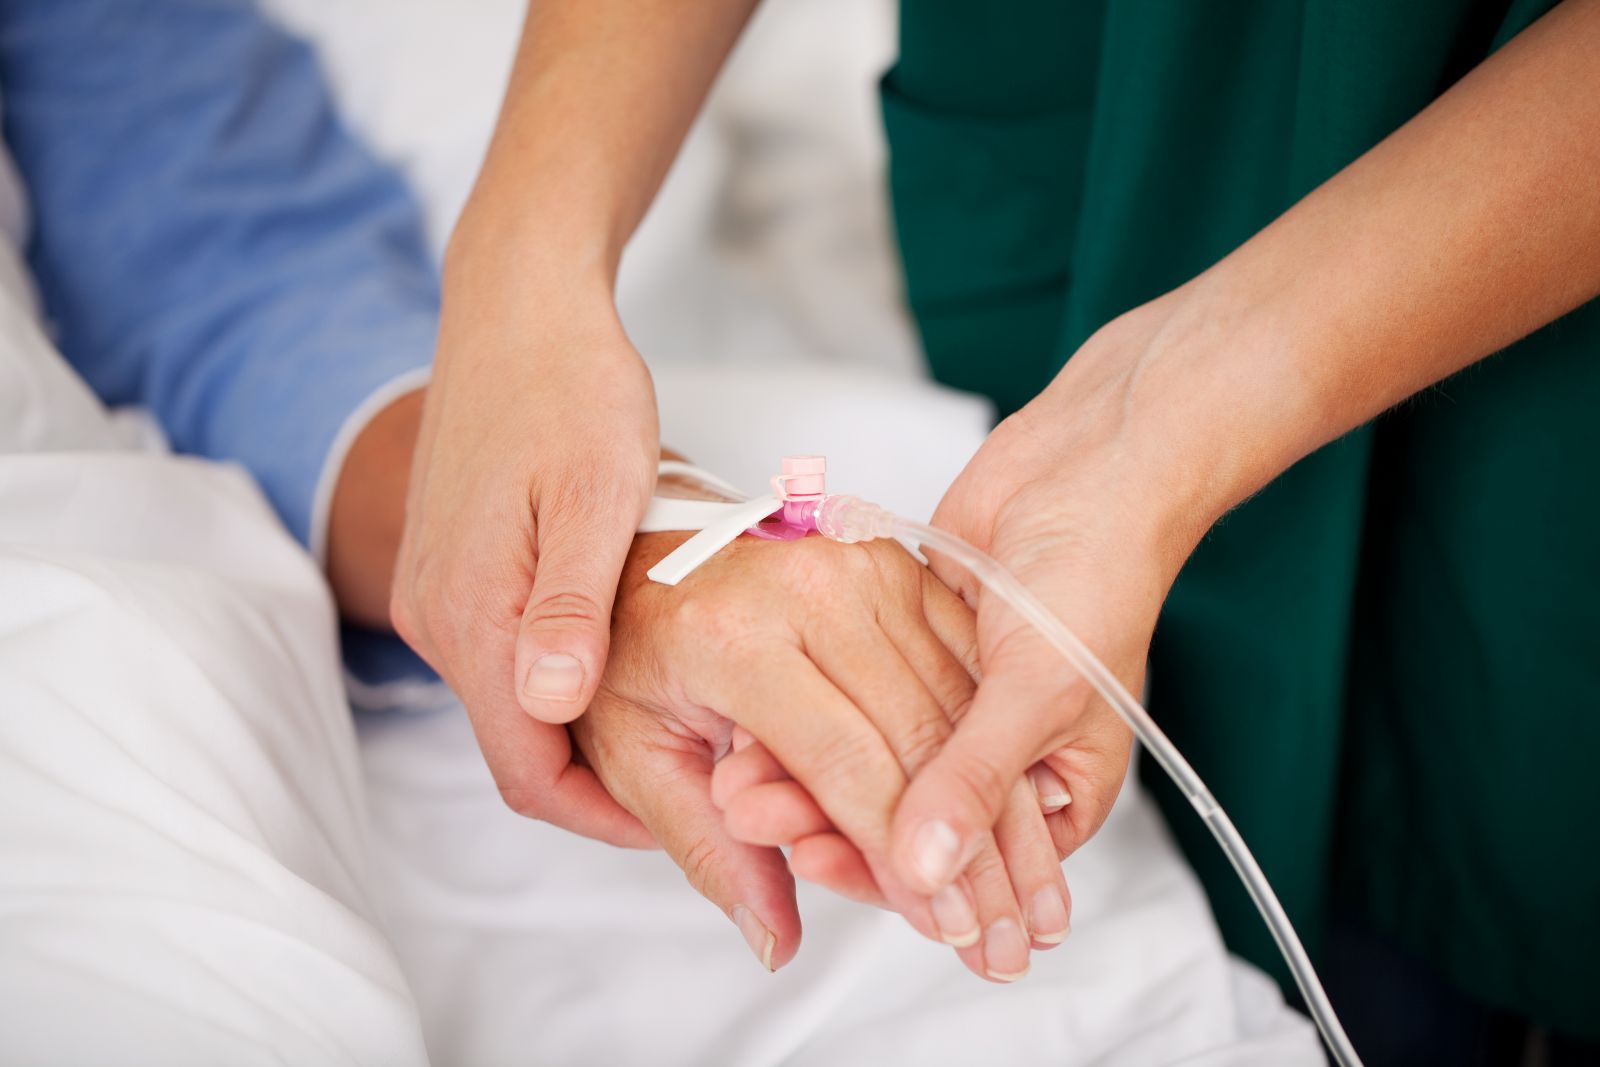 iv therapy nurse holding womans hand